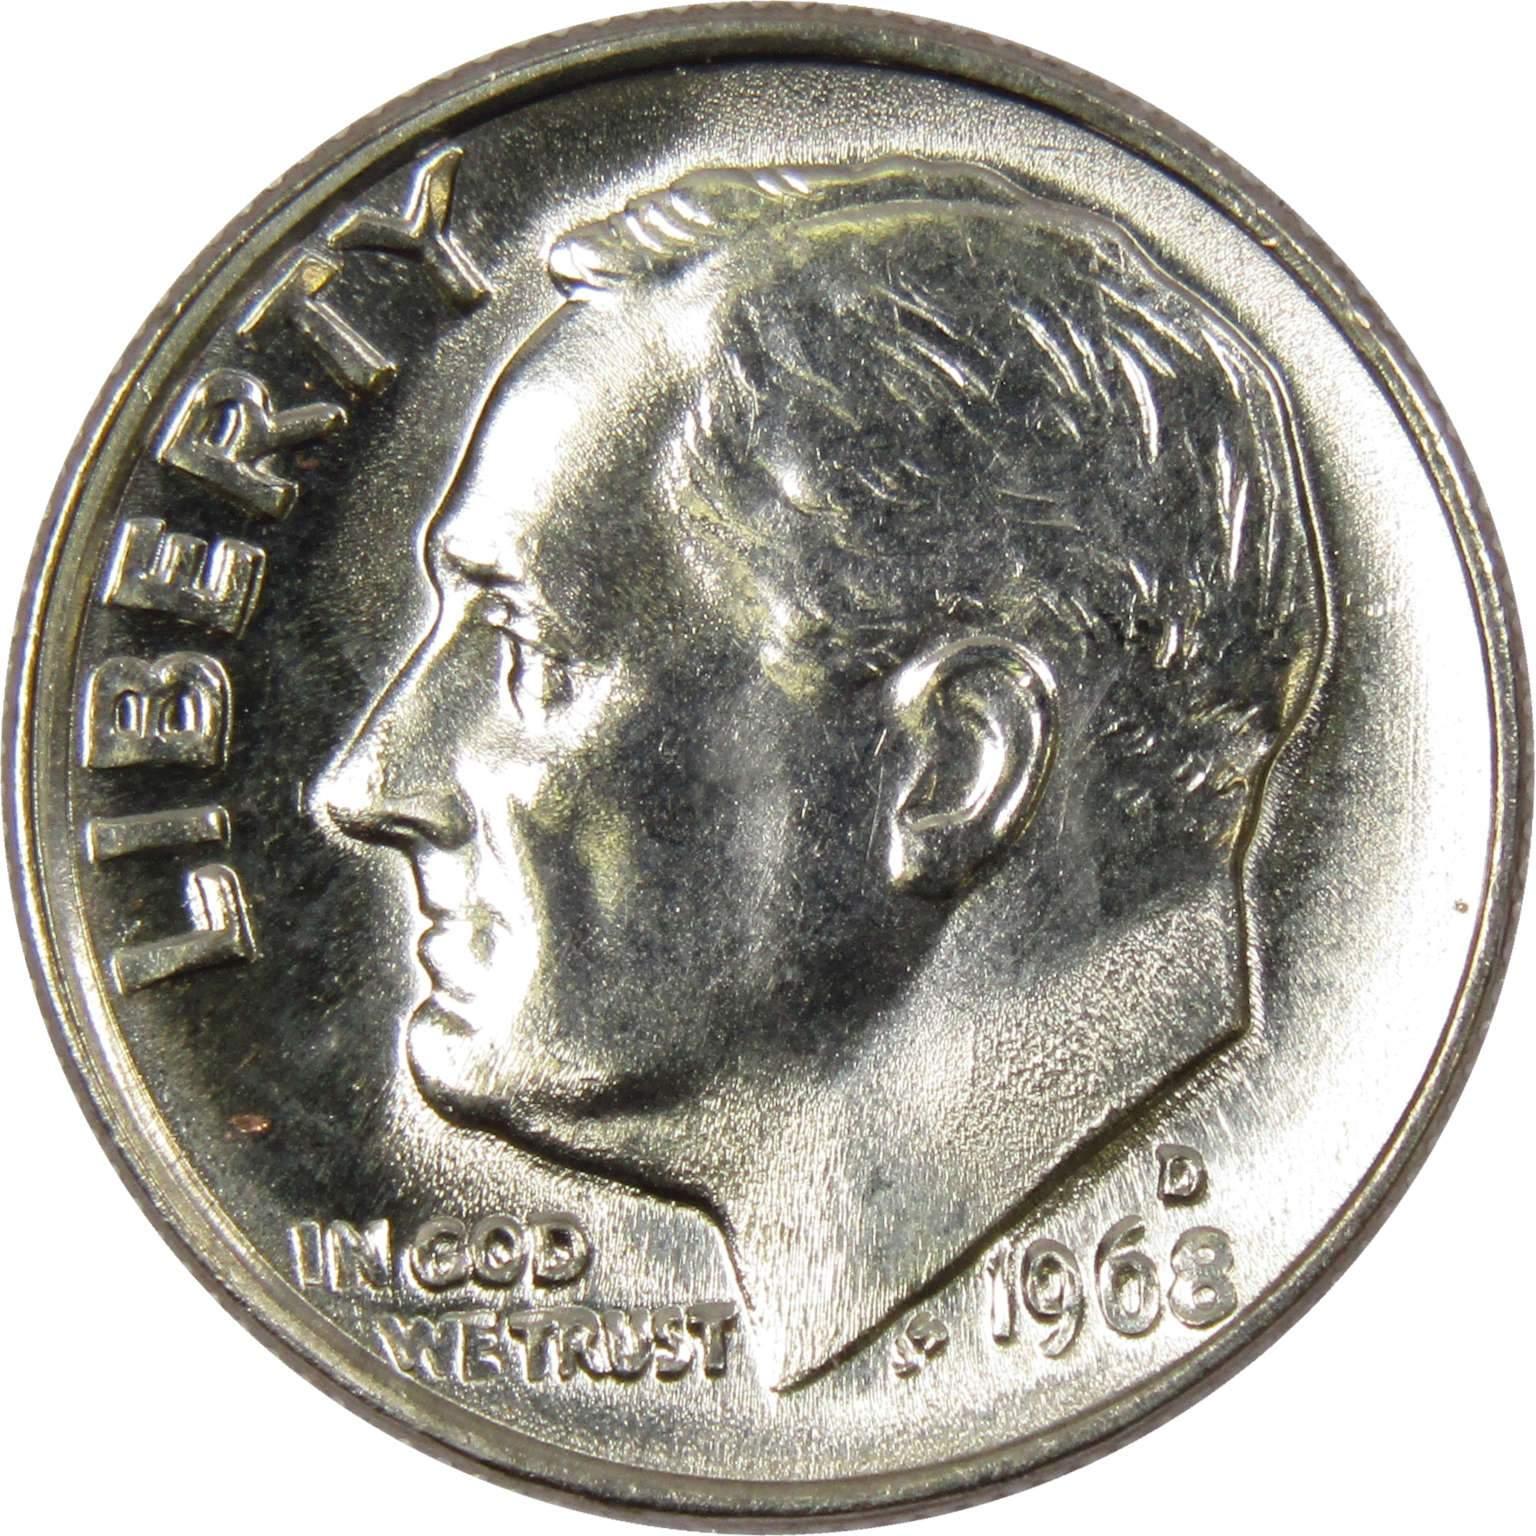 1968 D Roosevelt Dime BU Uncirculated Mint State 10c US Coin Collectible